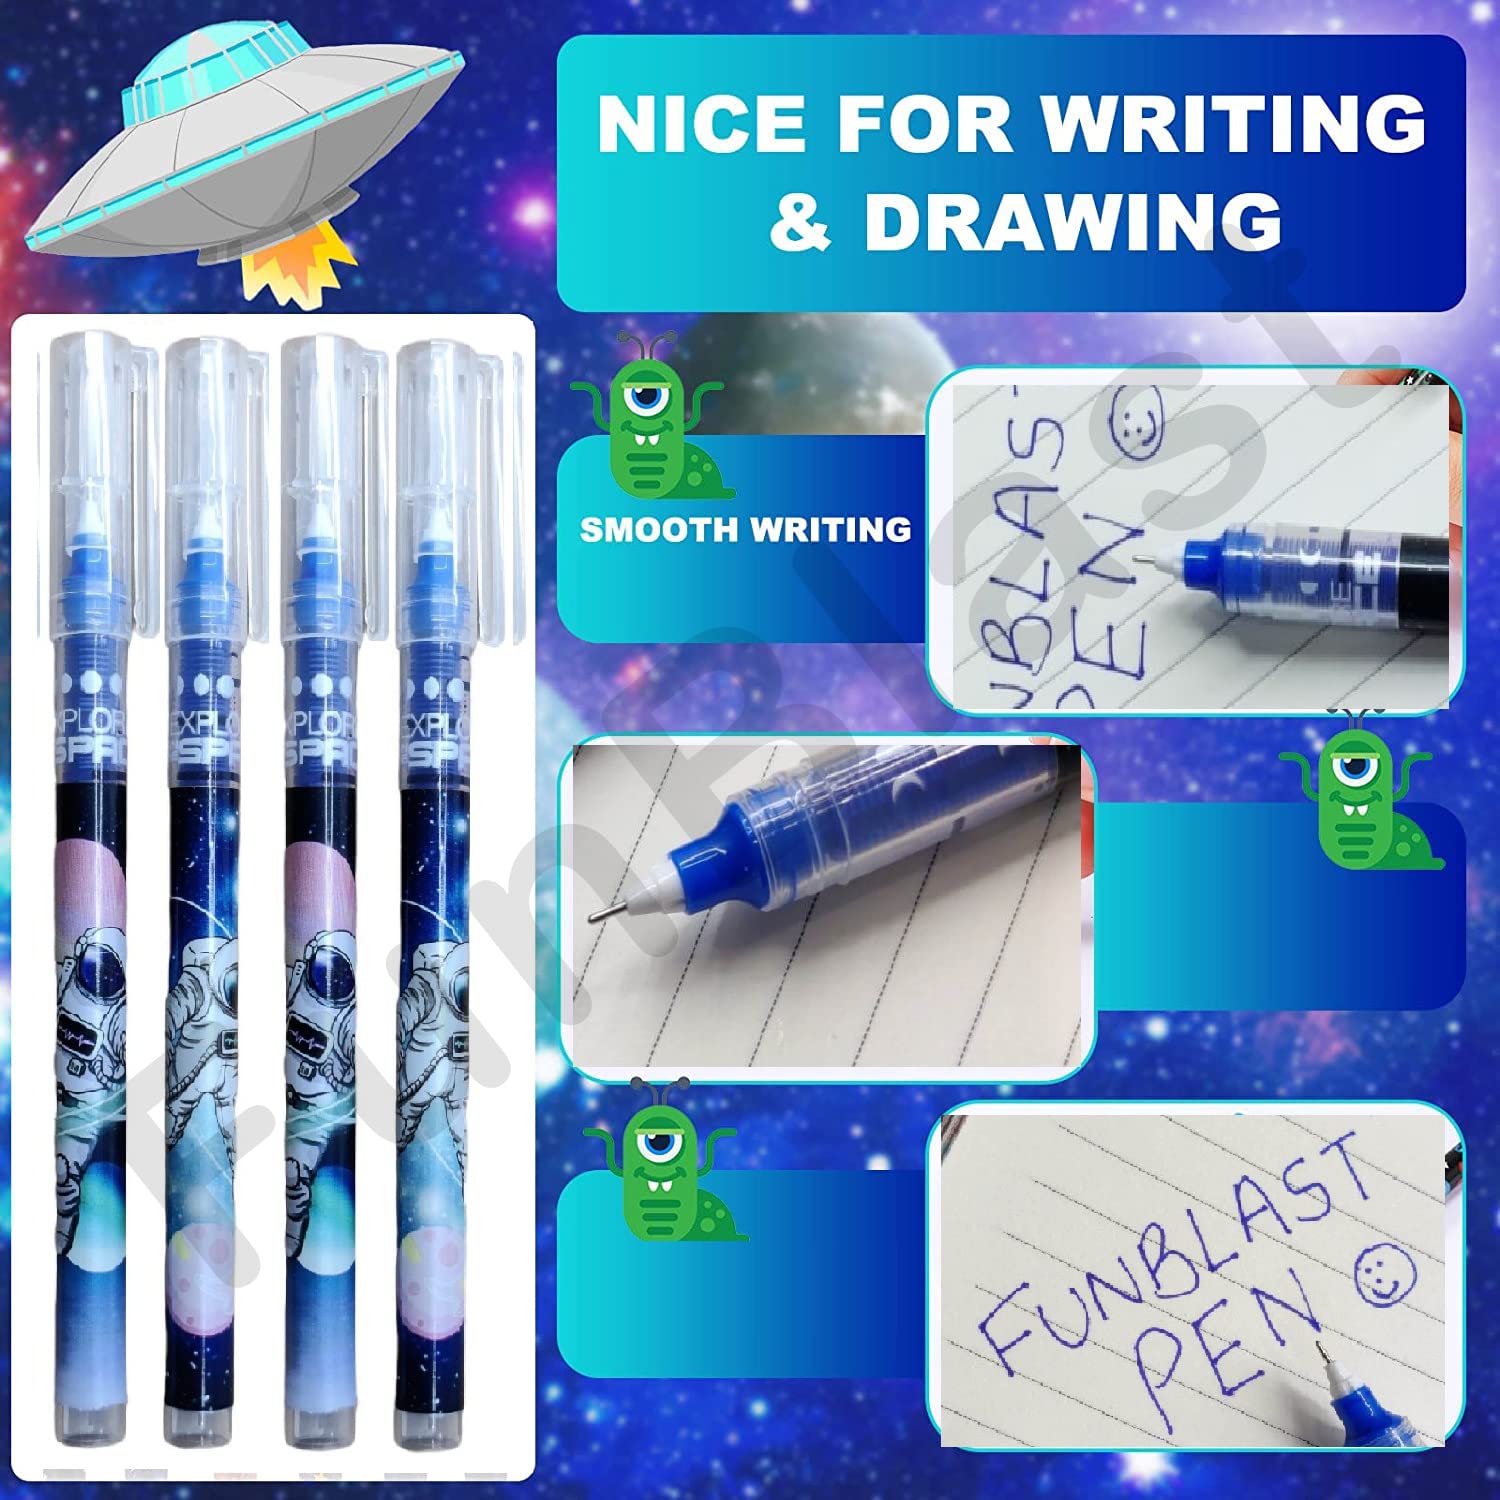 Gel Pens for Writing - Cartoon Design Lightweight Gel Pen with Comfortable Grip for Extra Smooth Writing, Stationery for School & Office, Birthday Return Gift (6 Pcs) – Blue Ink